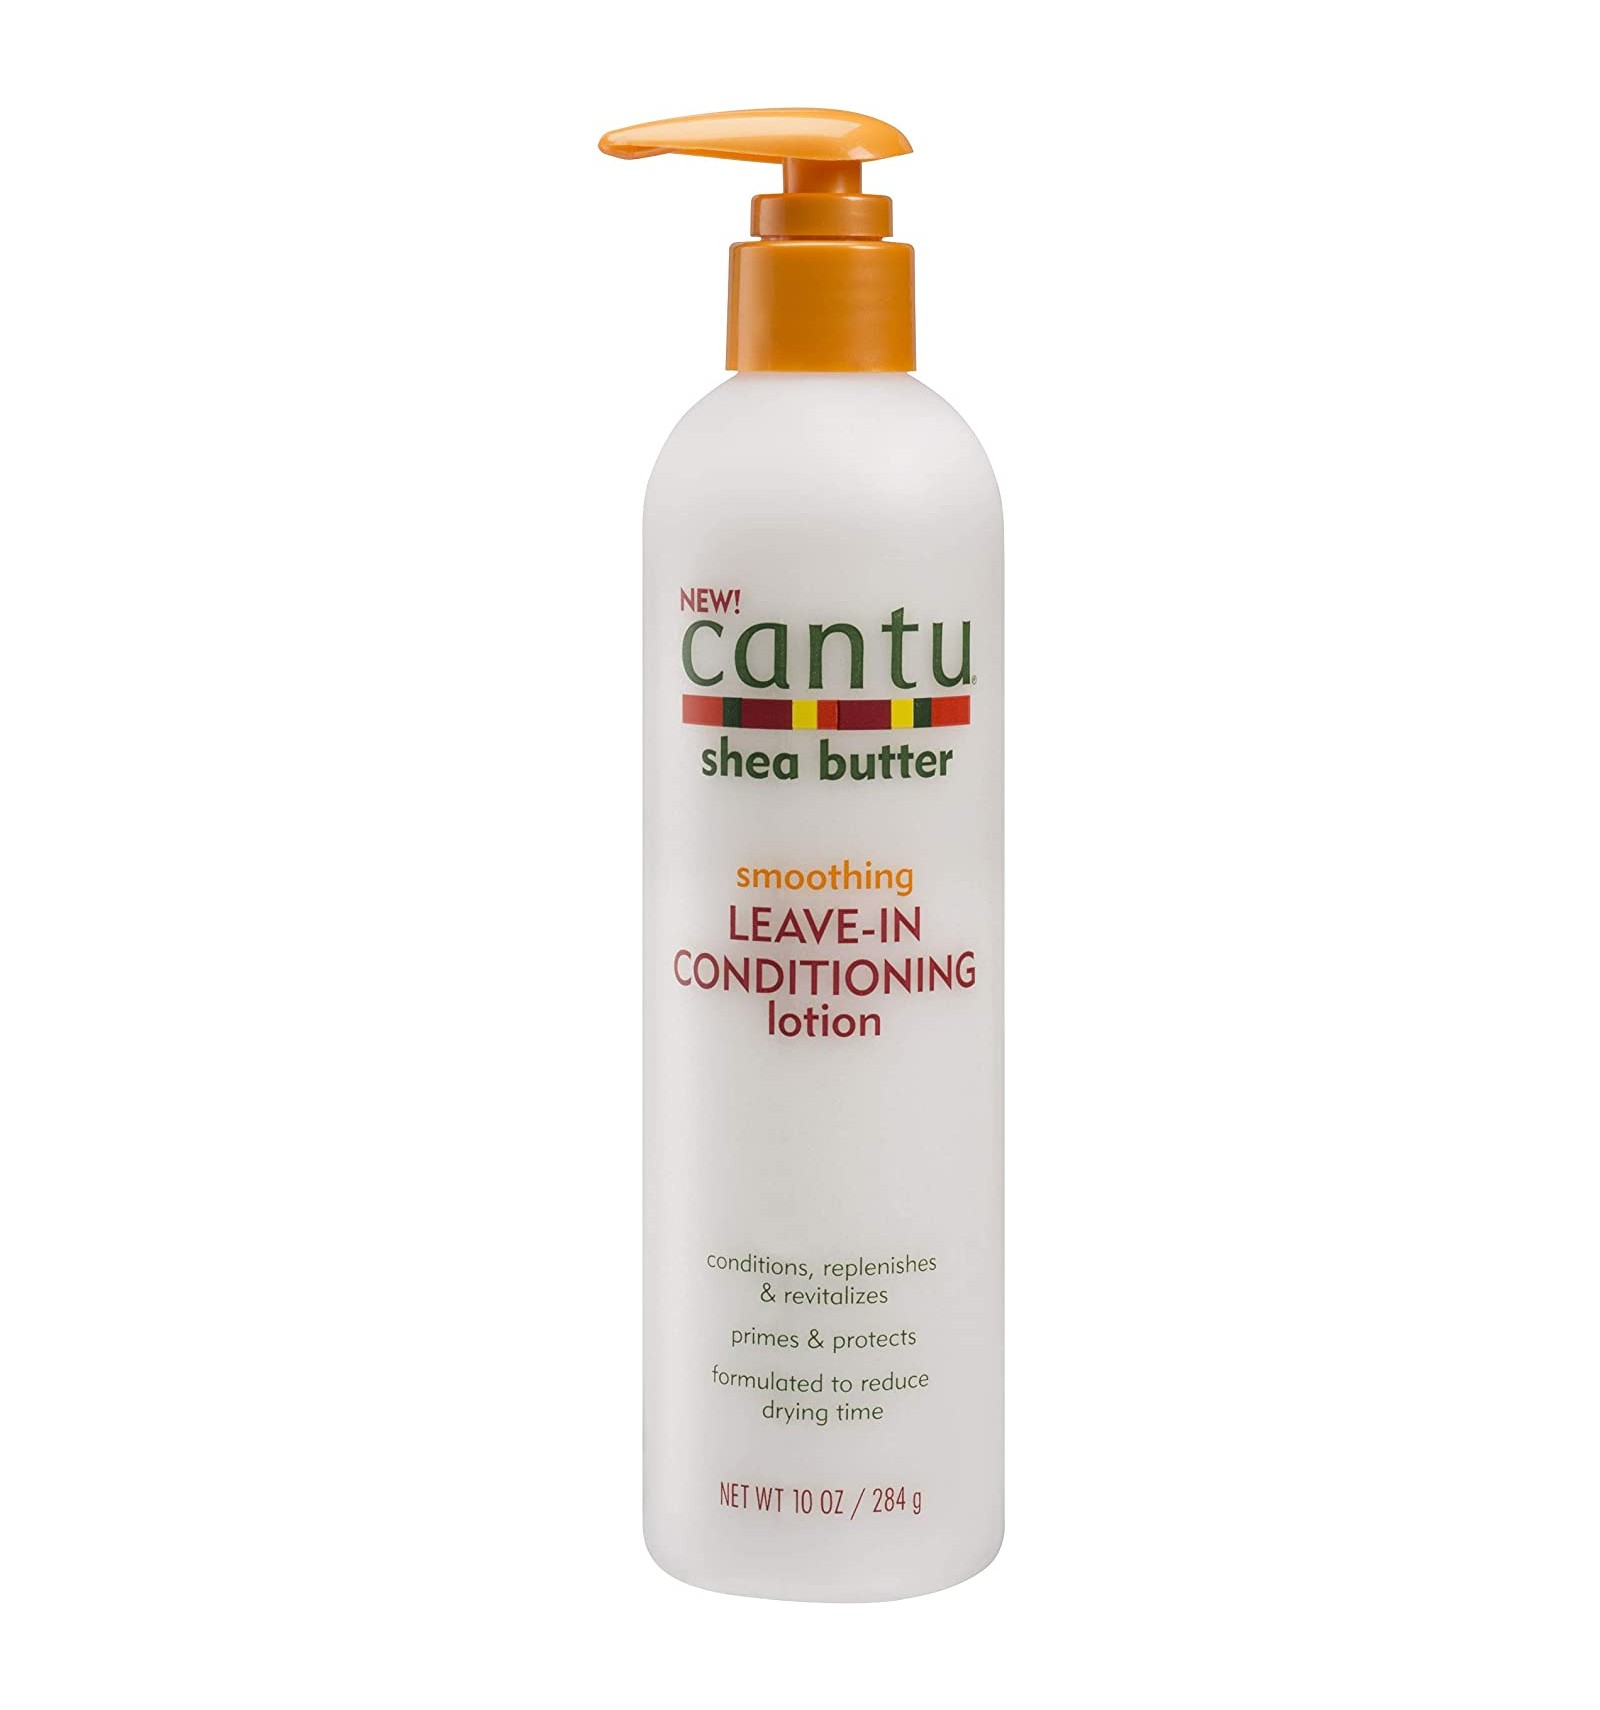 Cantu Shea Butter Smoothing Leave-In Conditioning Lotion 10oz / 284g BOTTLE